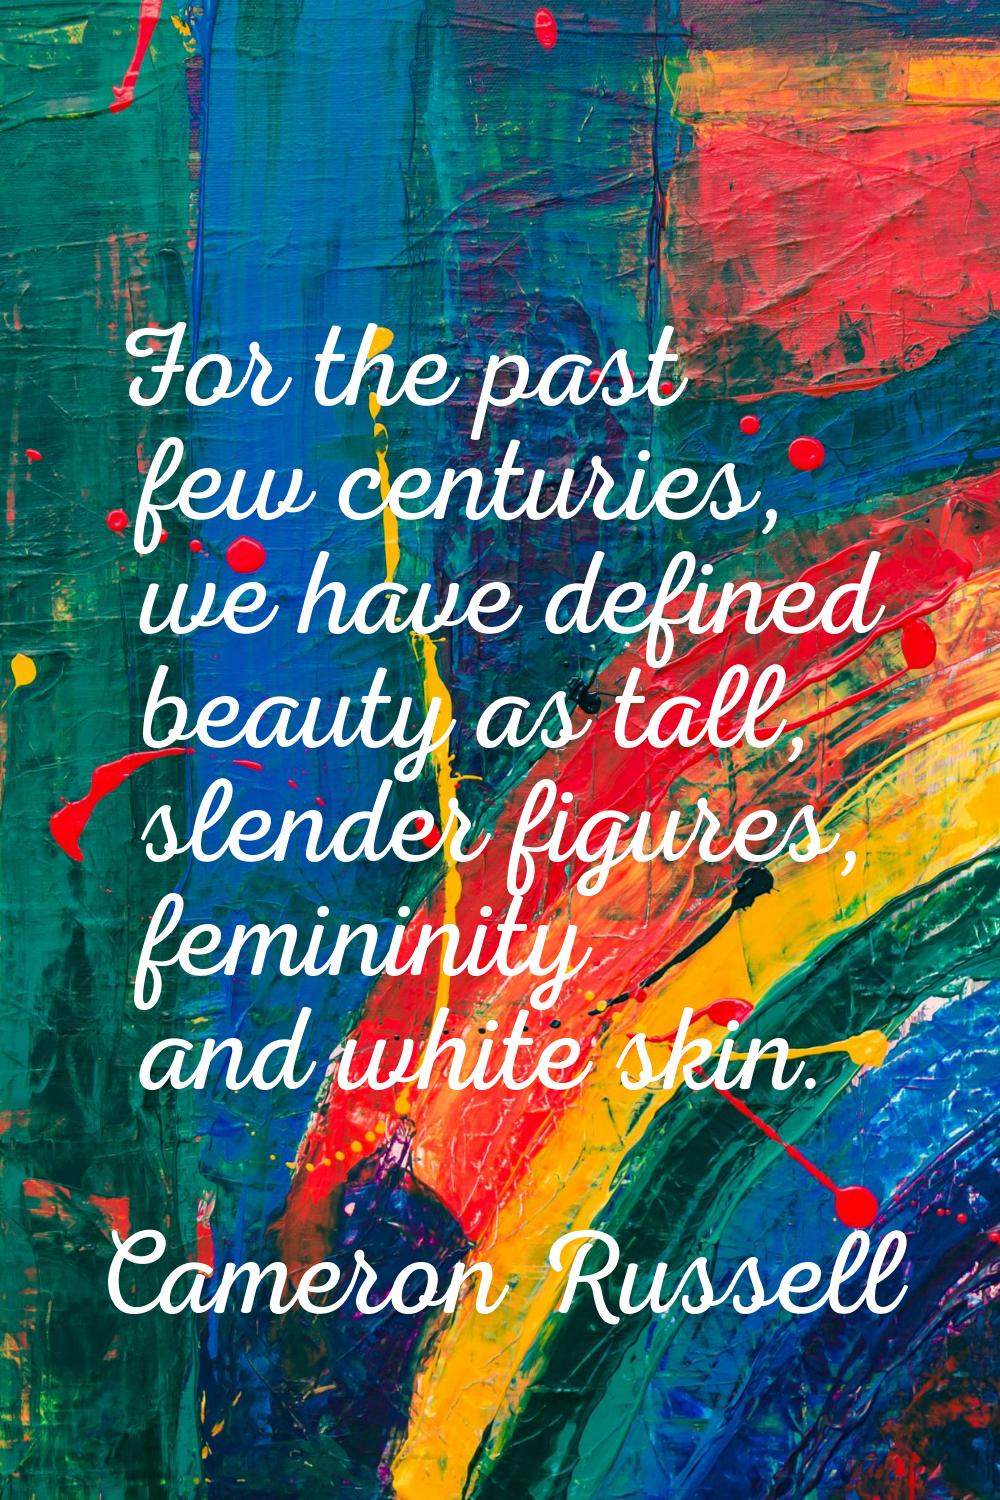 For the past few centuries, we have defined beauty as tall, slender figures, femininity and white s